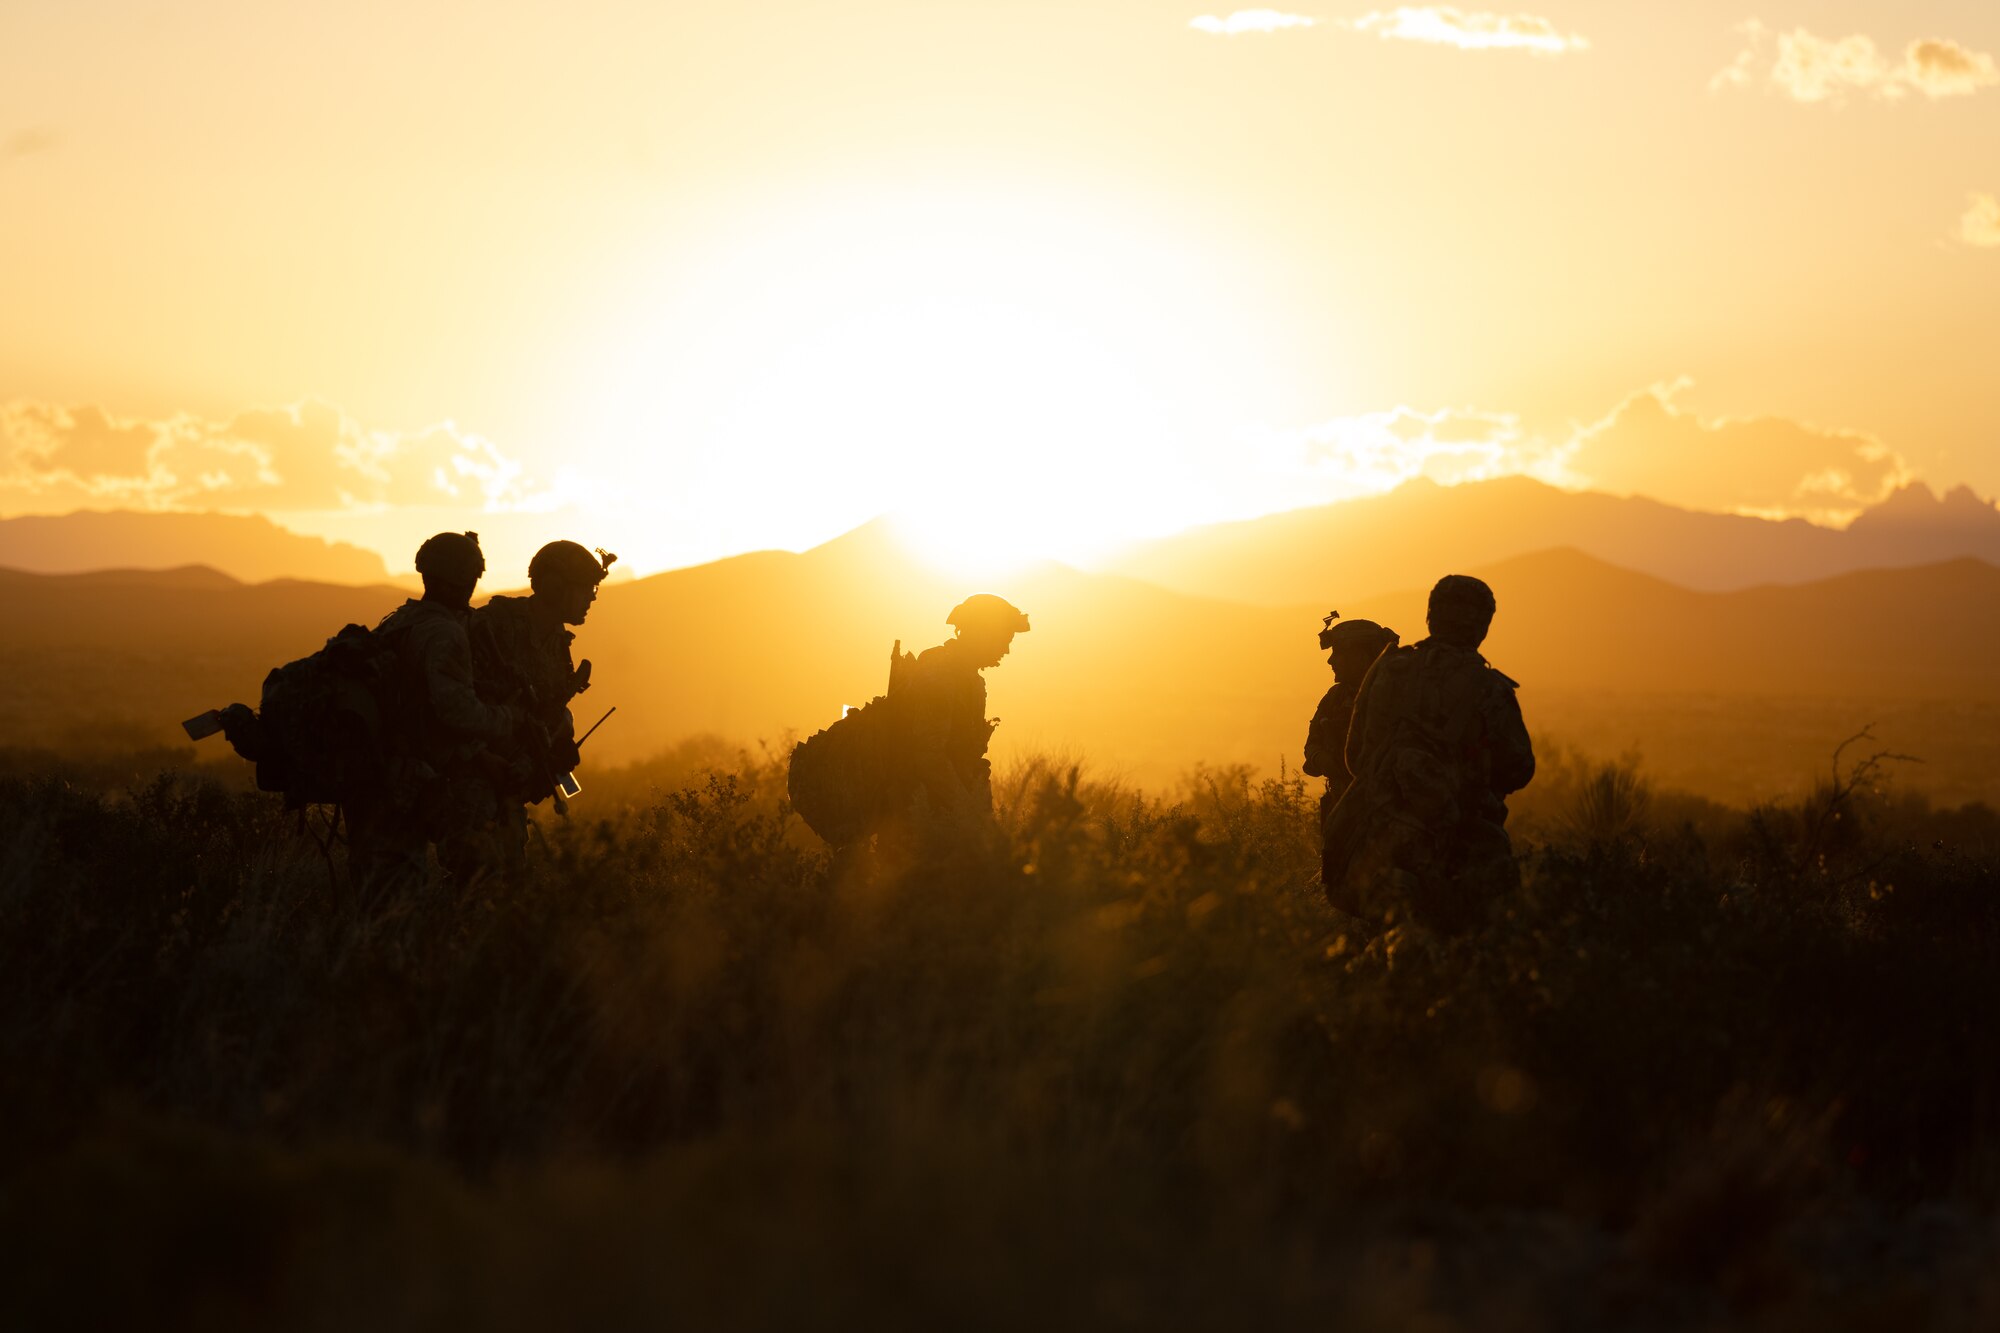 Security forces Airmen operate in the desert at sunset